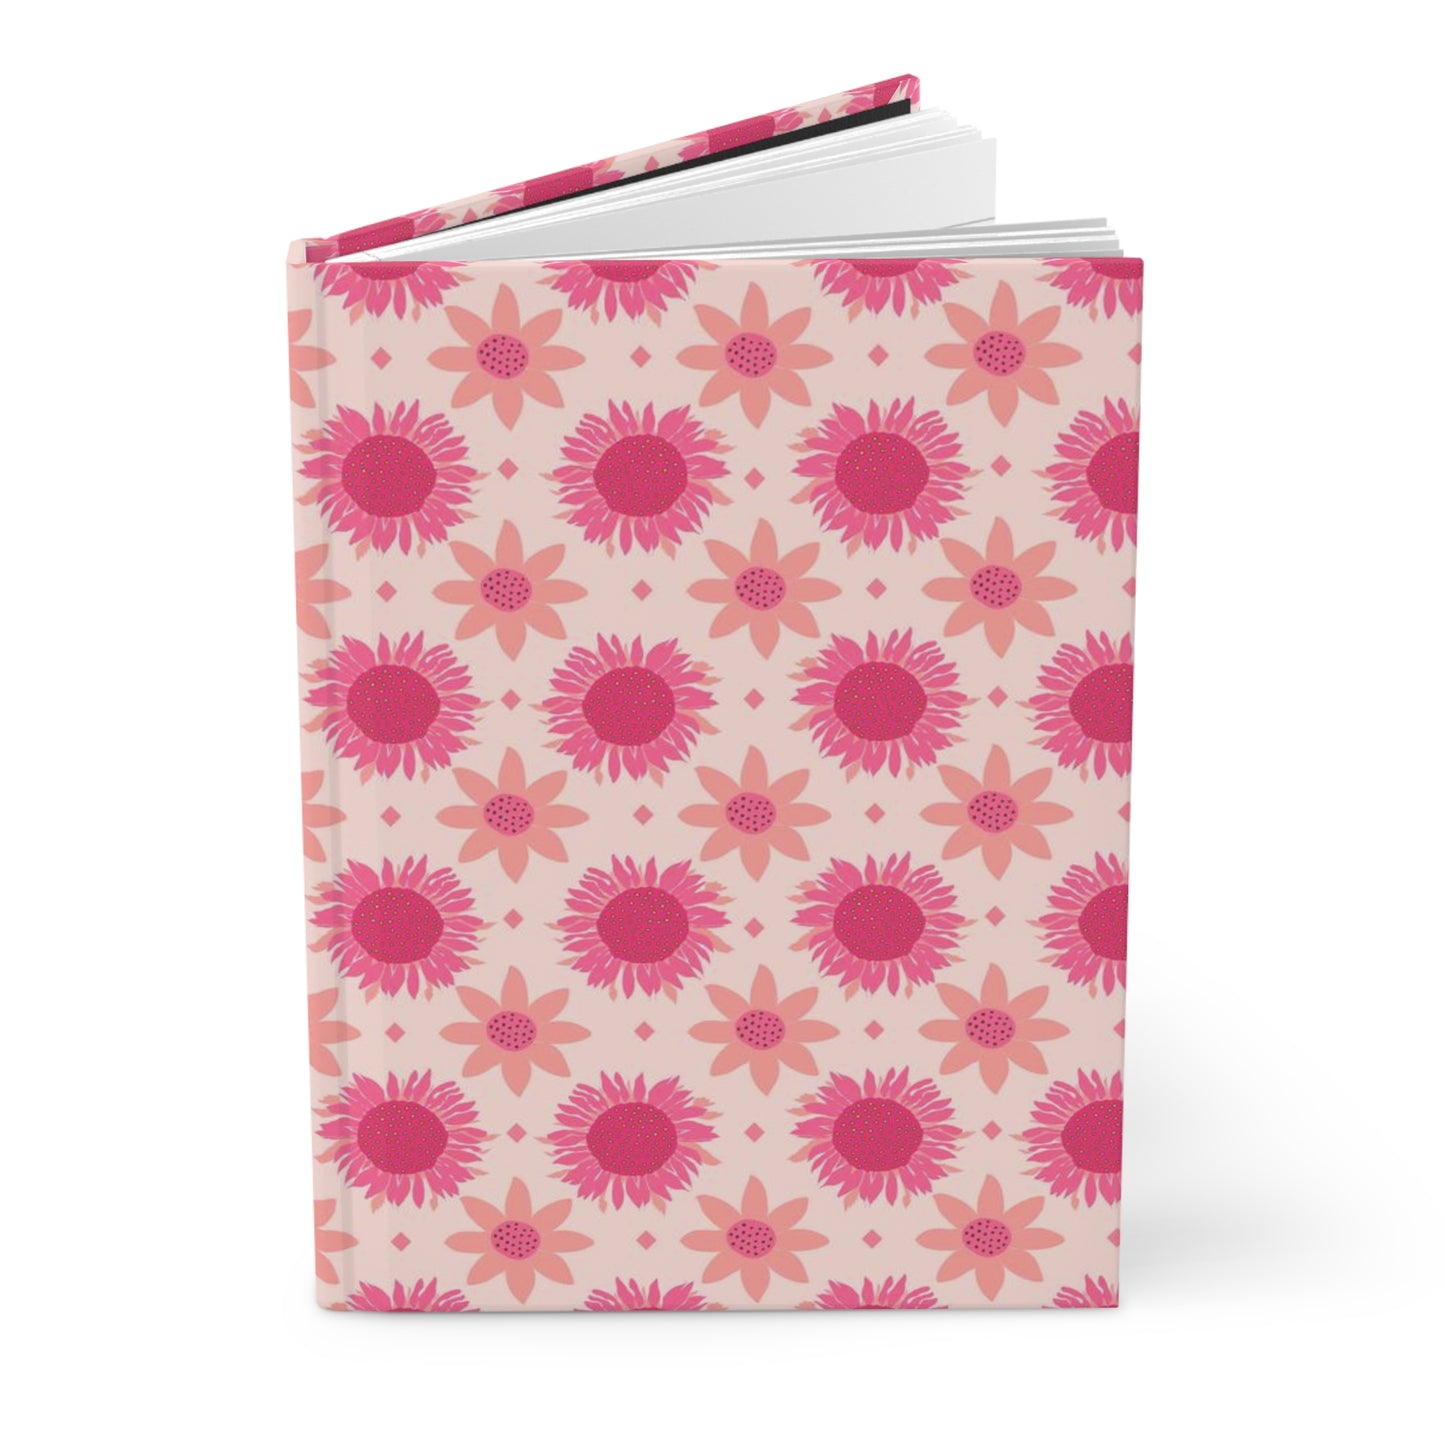 Retro Pink Sunflowers on Pink Background Hardcover Journal Matte